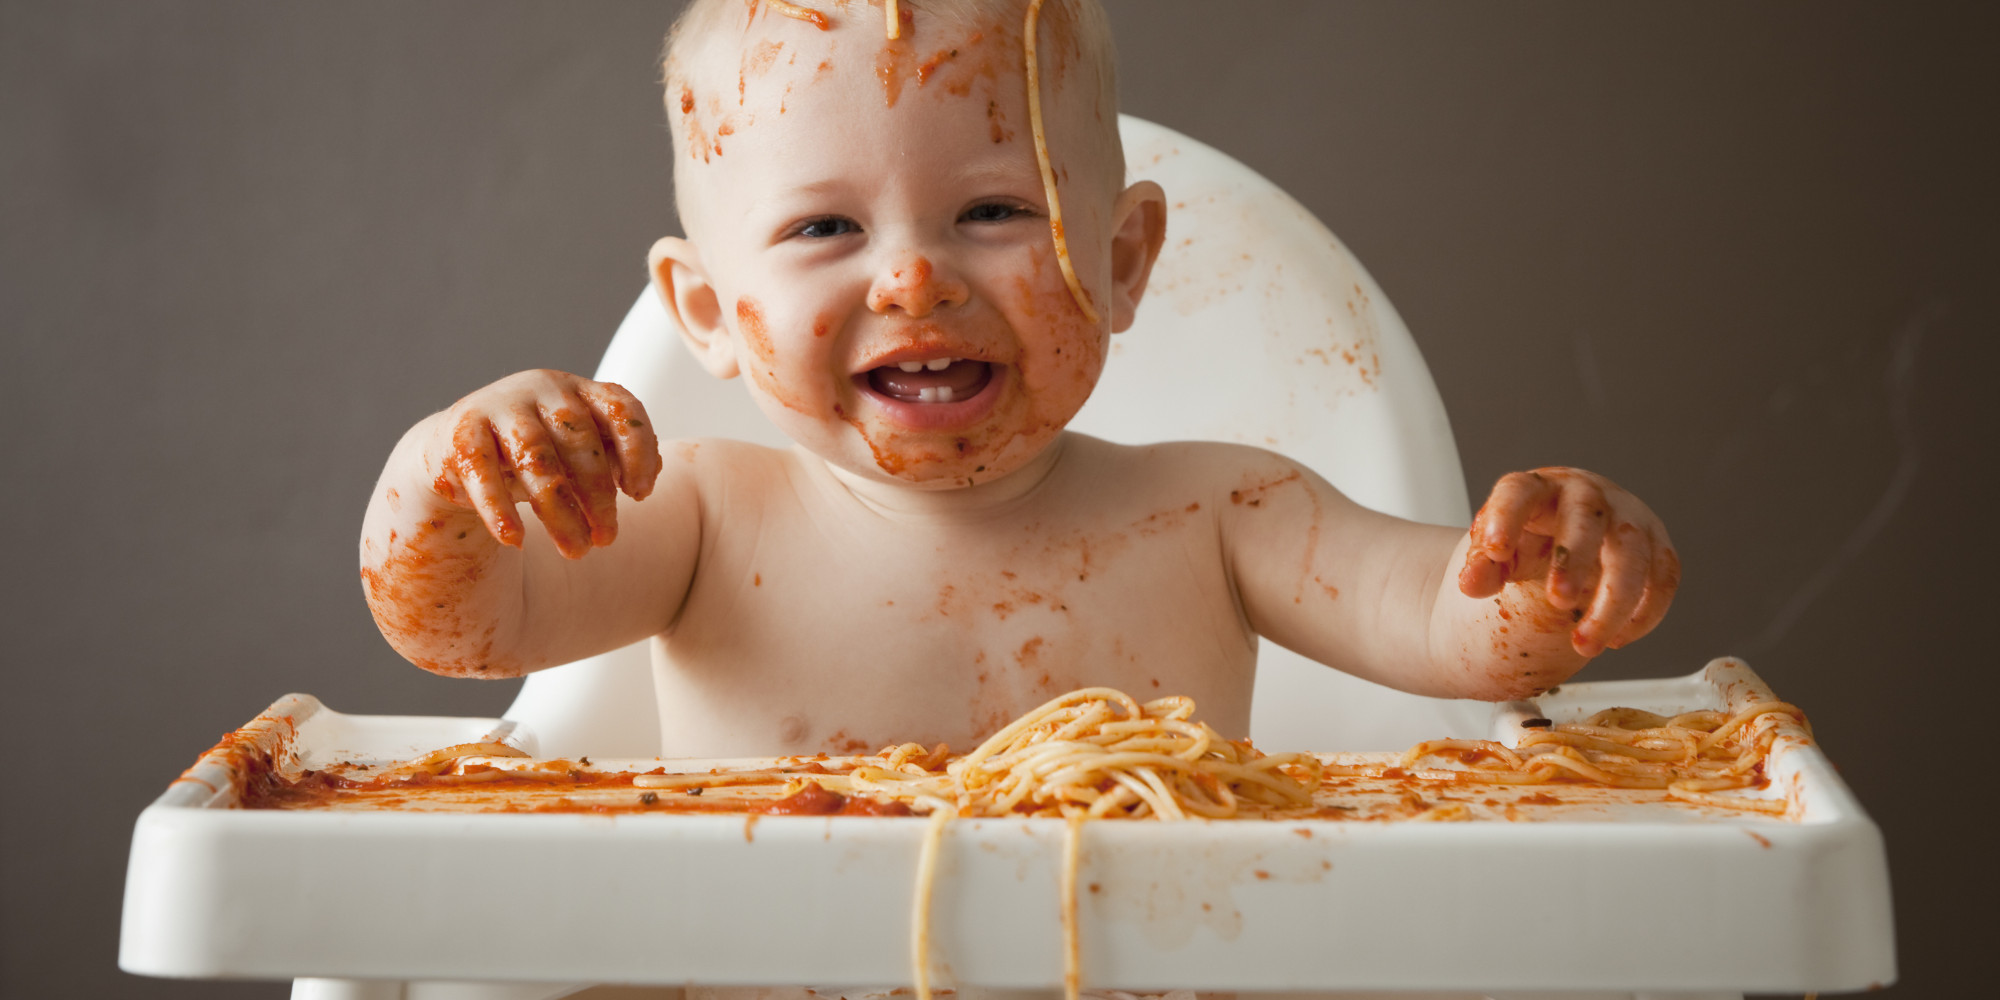 Messy Kids Who Play With Their Food May Be Faster Learners ...